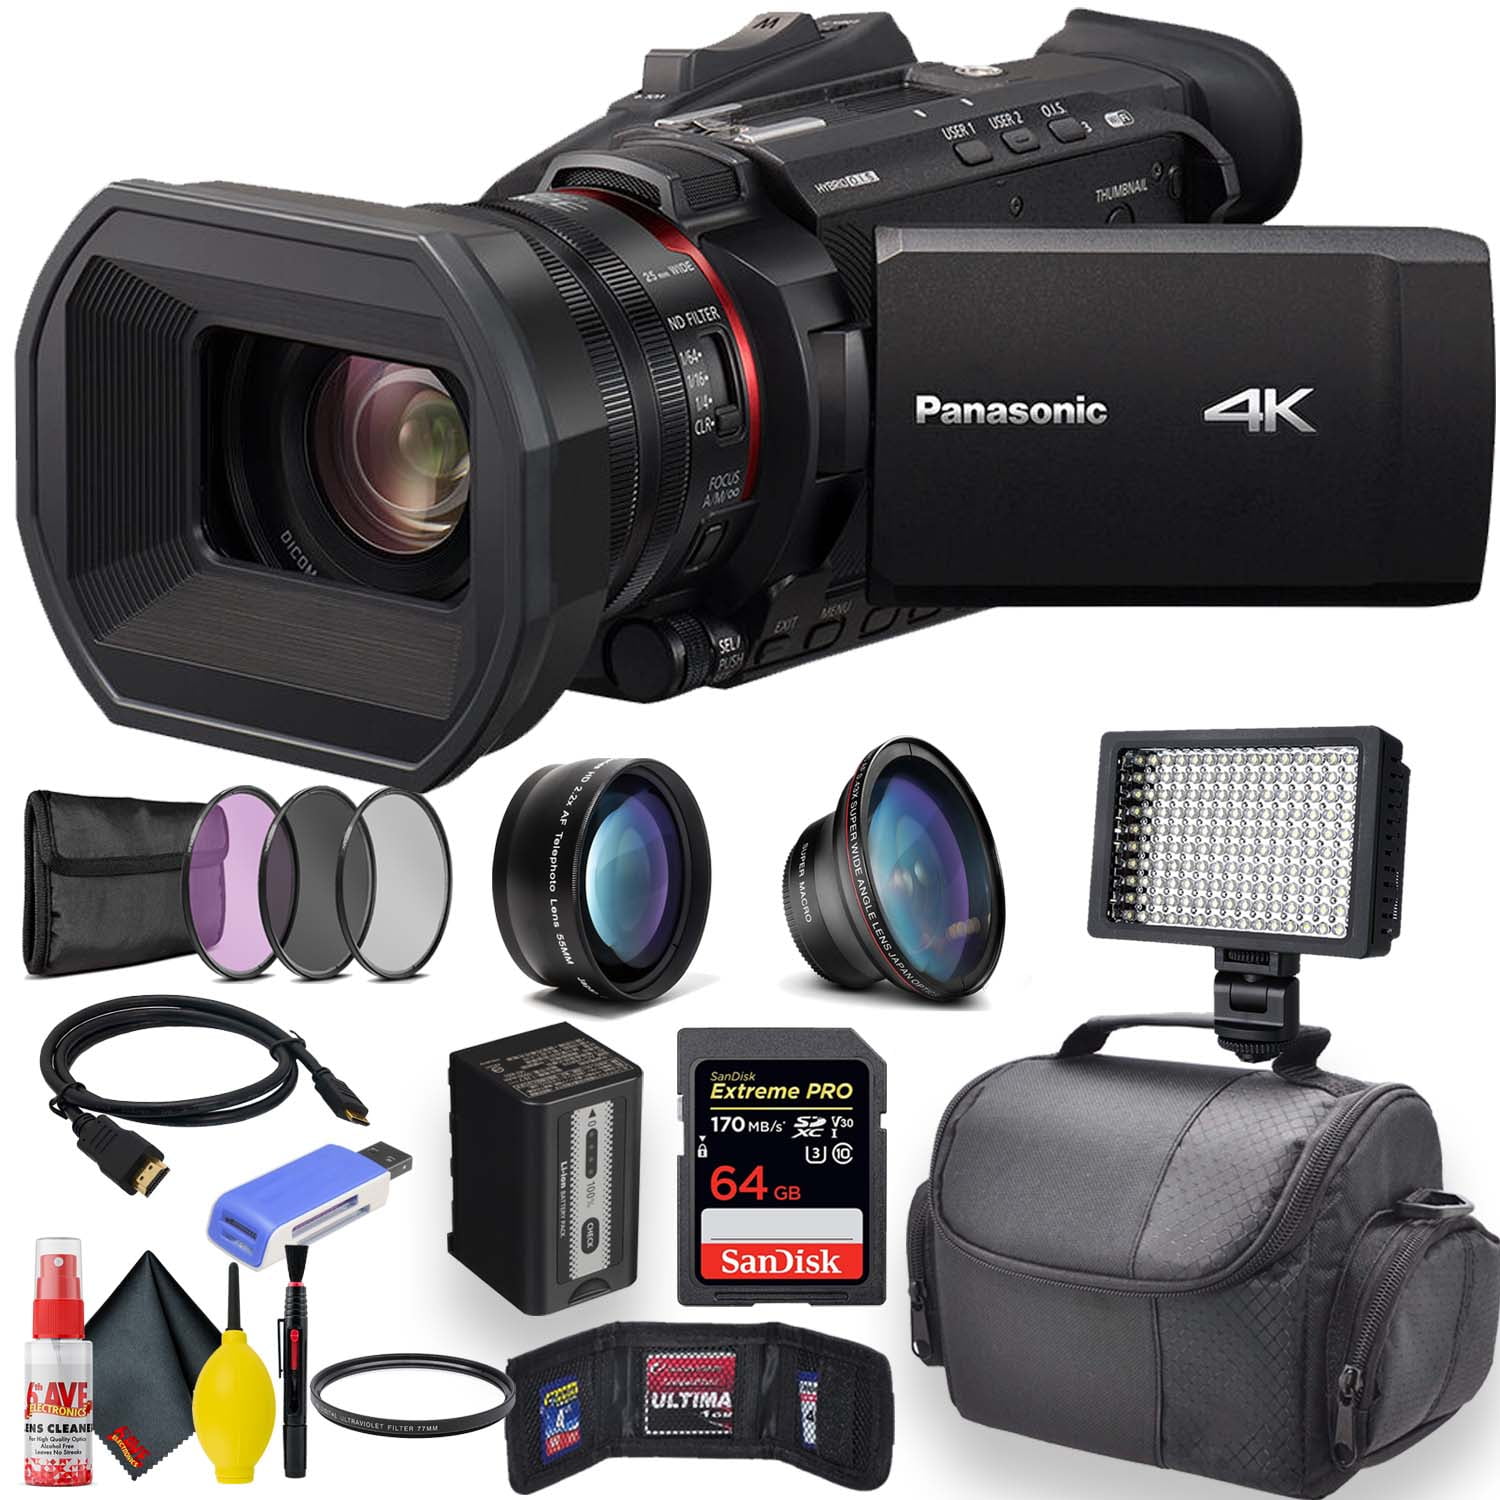 HC-X1500 4K Camcorder with 24x Optical Zoom, WiFi HD Live Streaming W/ UV and Filter Kit + Soft Case + Sandisk Extreme Pro 64GB Card + LED Light +